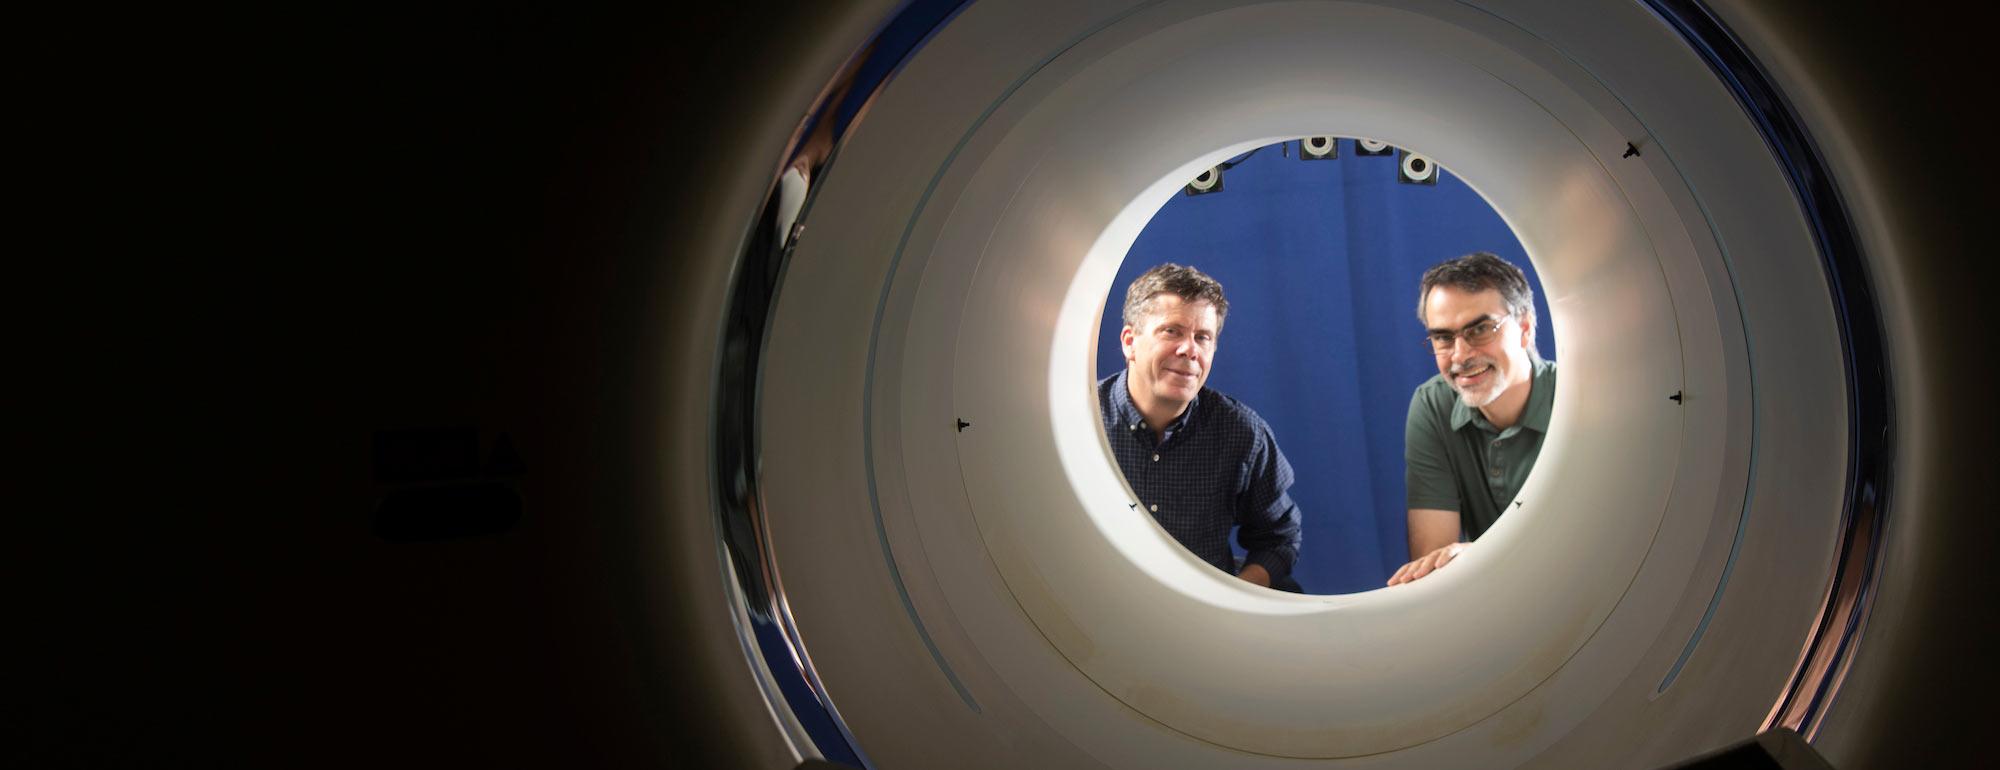 Two men pose at the opening of a new full body PET scanner that allows for easier medical diagnostics